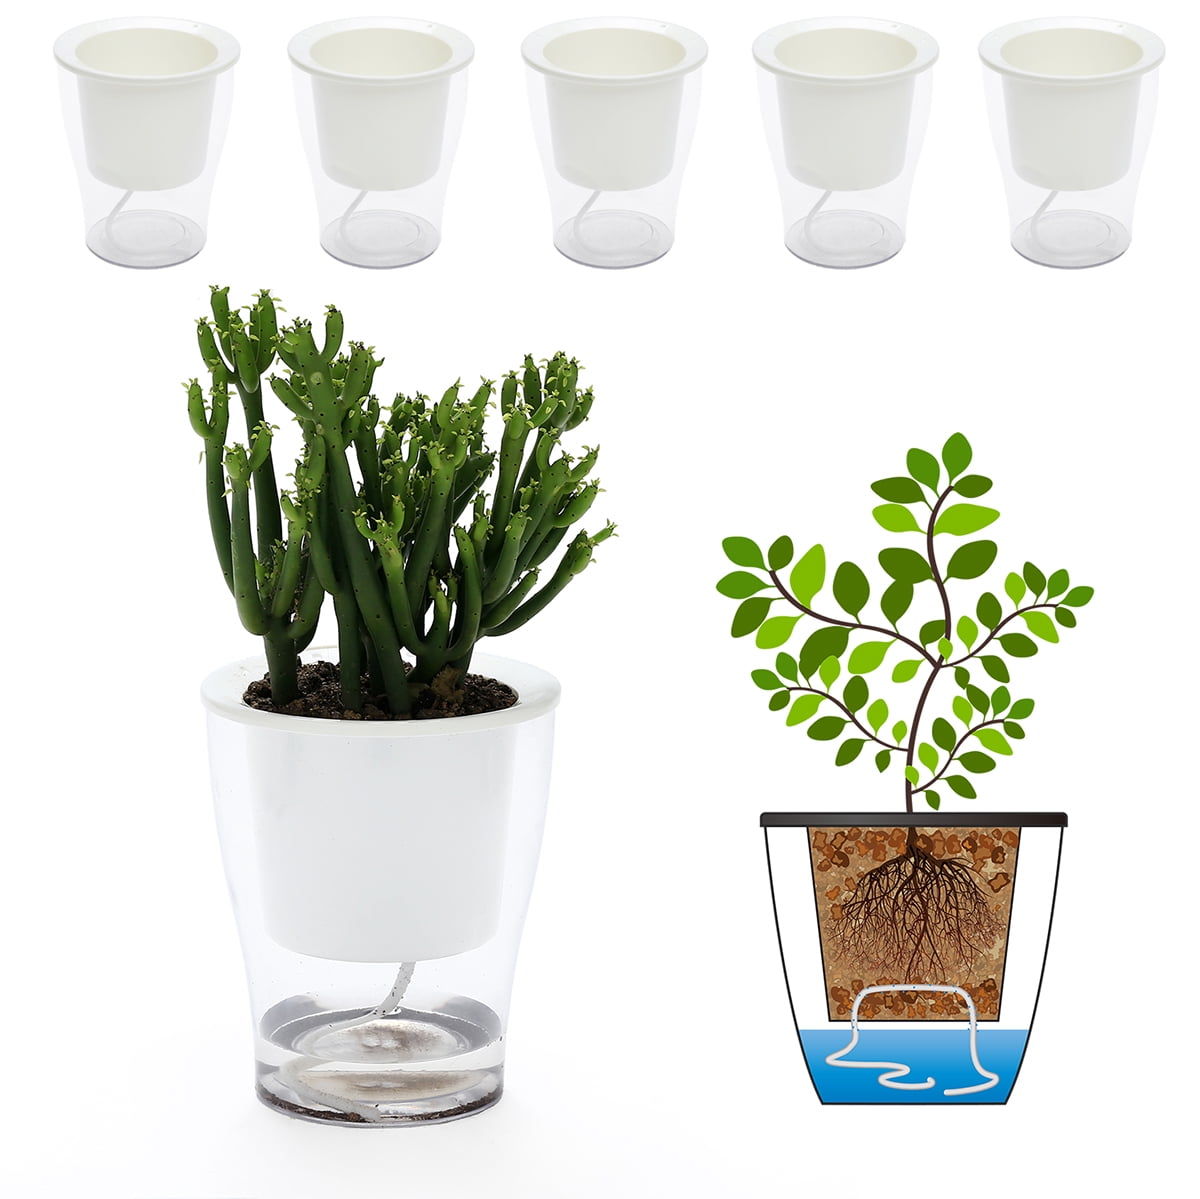 2pcs Self Watering Plant Flower Pot Water Container PET Planter Garden Tools 